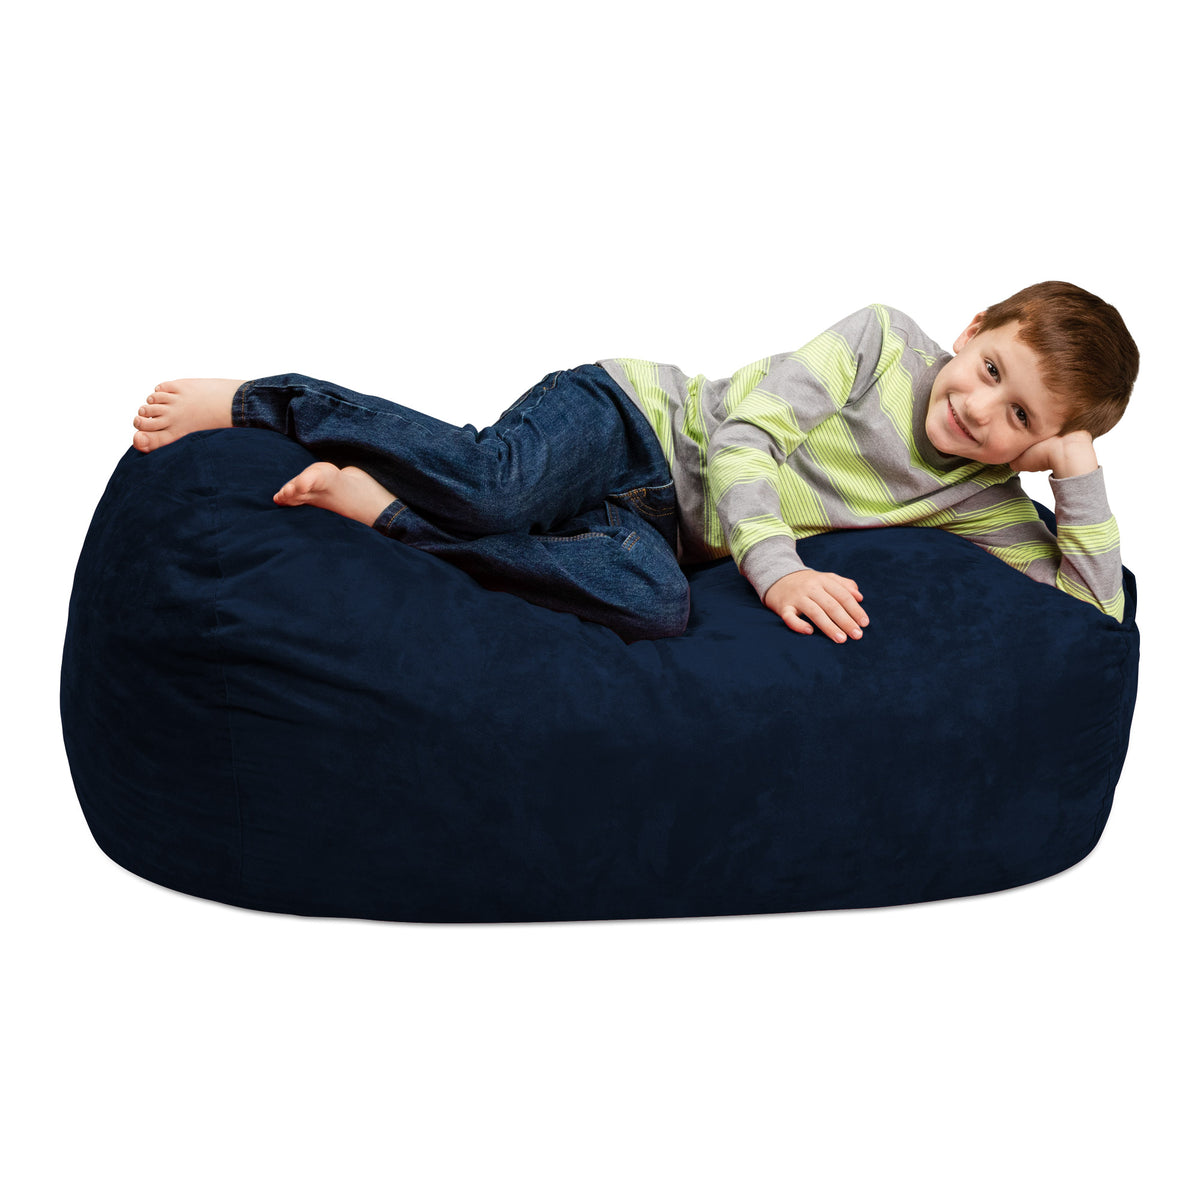 Chill Sack Bean Bag Chair, Memory Foam Lounger with Microsuede Cover, Kids,  Adults, 7 ft, Blue Pebble 